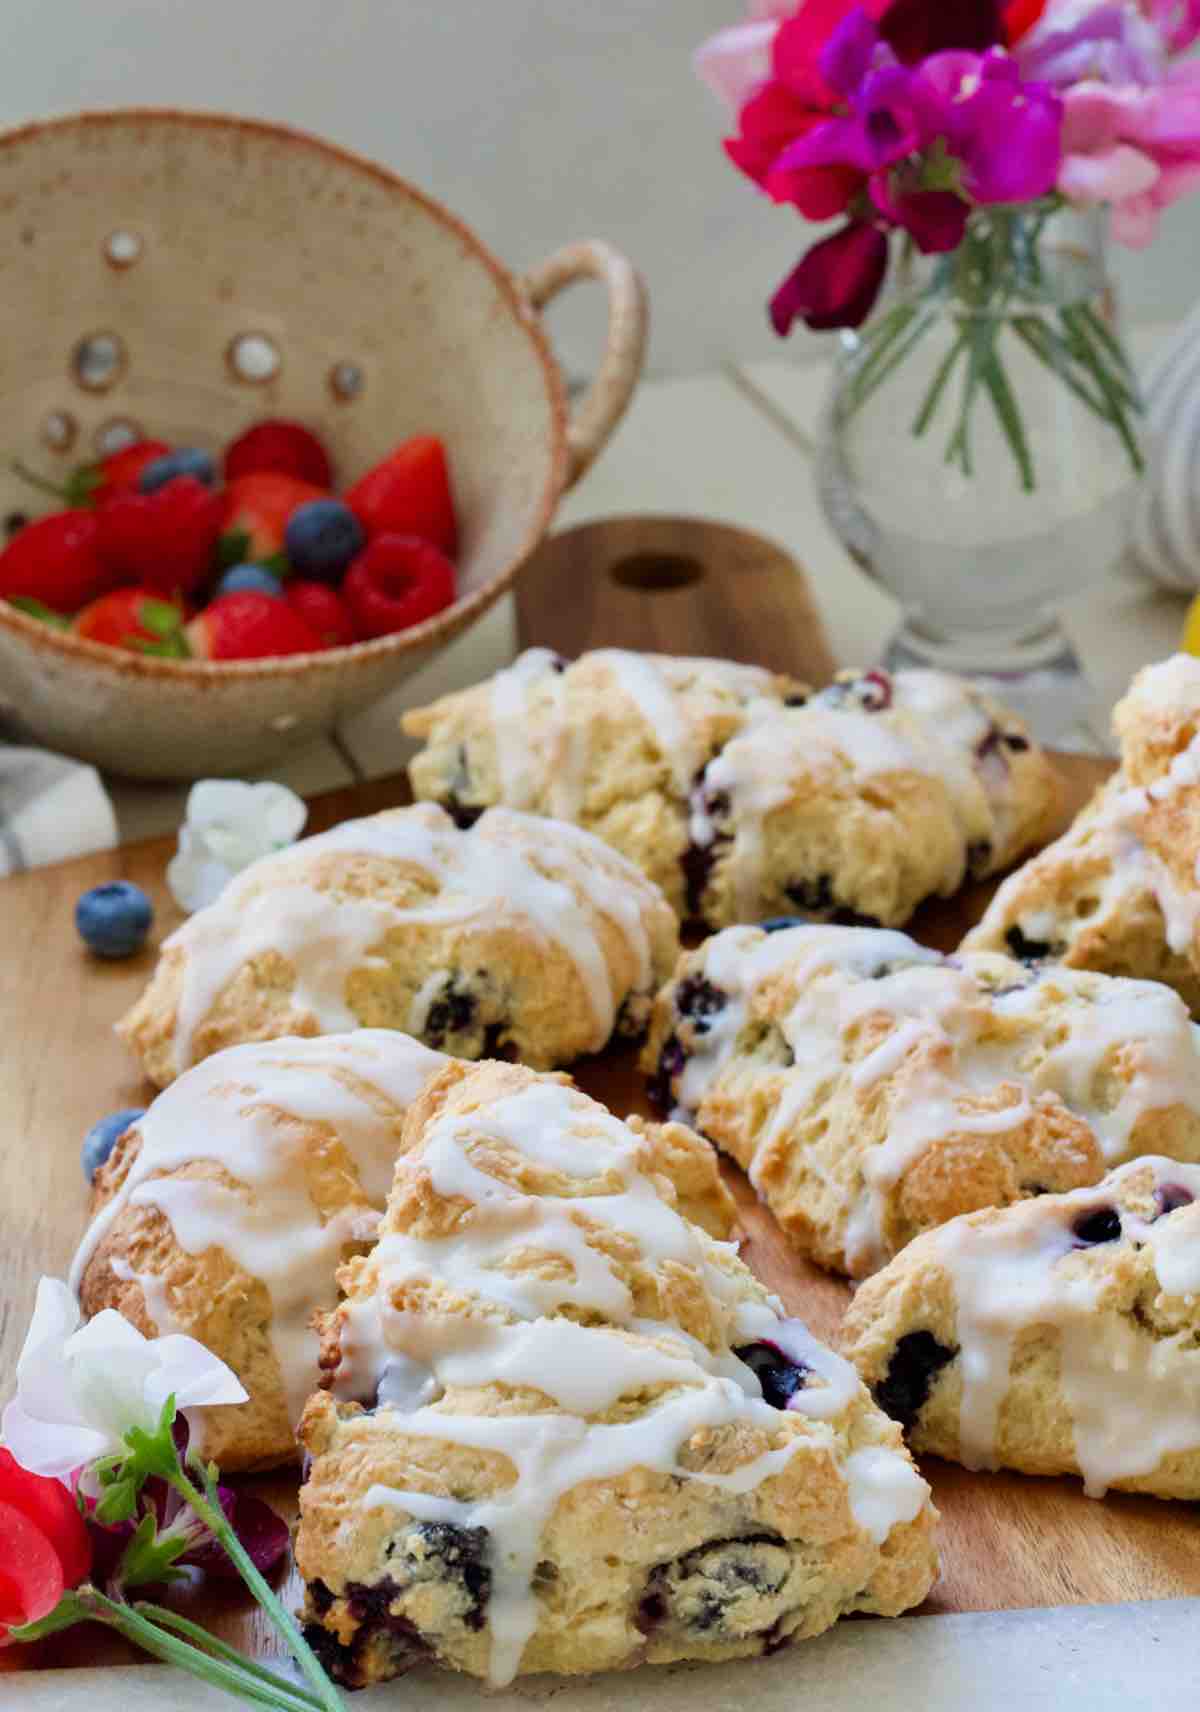 American style blueberry scones with lemon drizzle on a board.